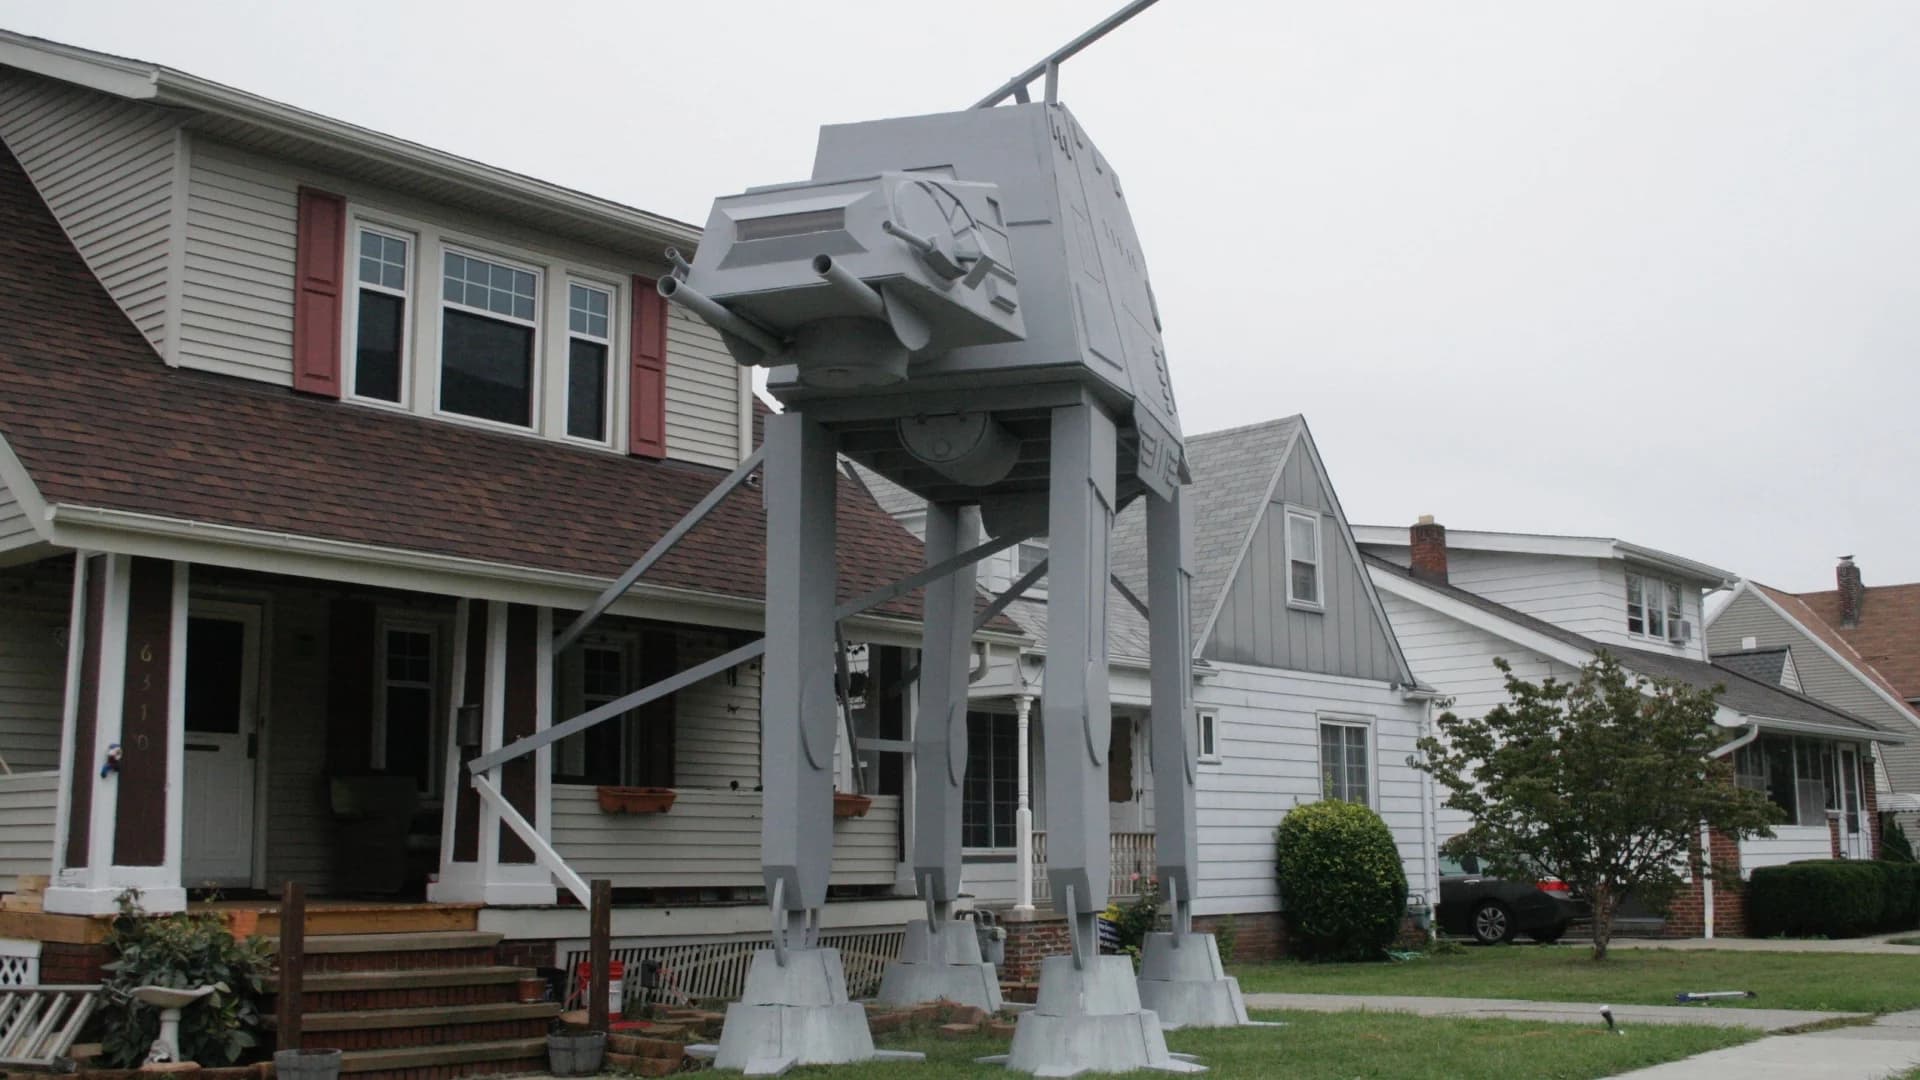 Man builds 2-story 'Star Wars' vehicle replica for Halloween